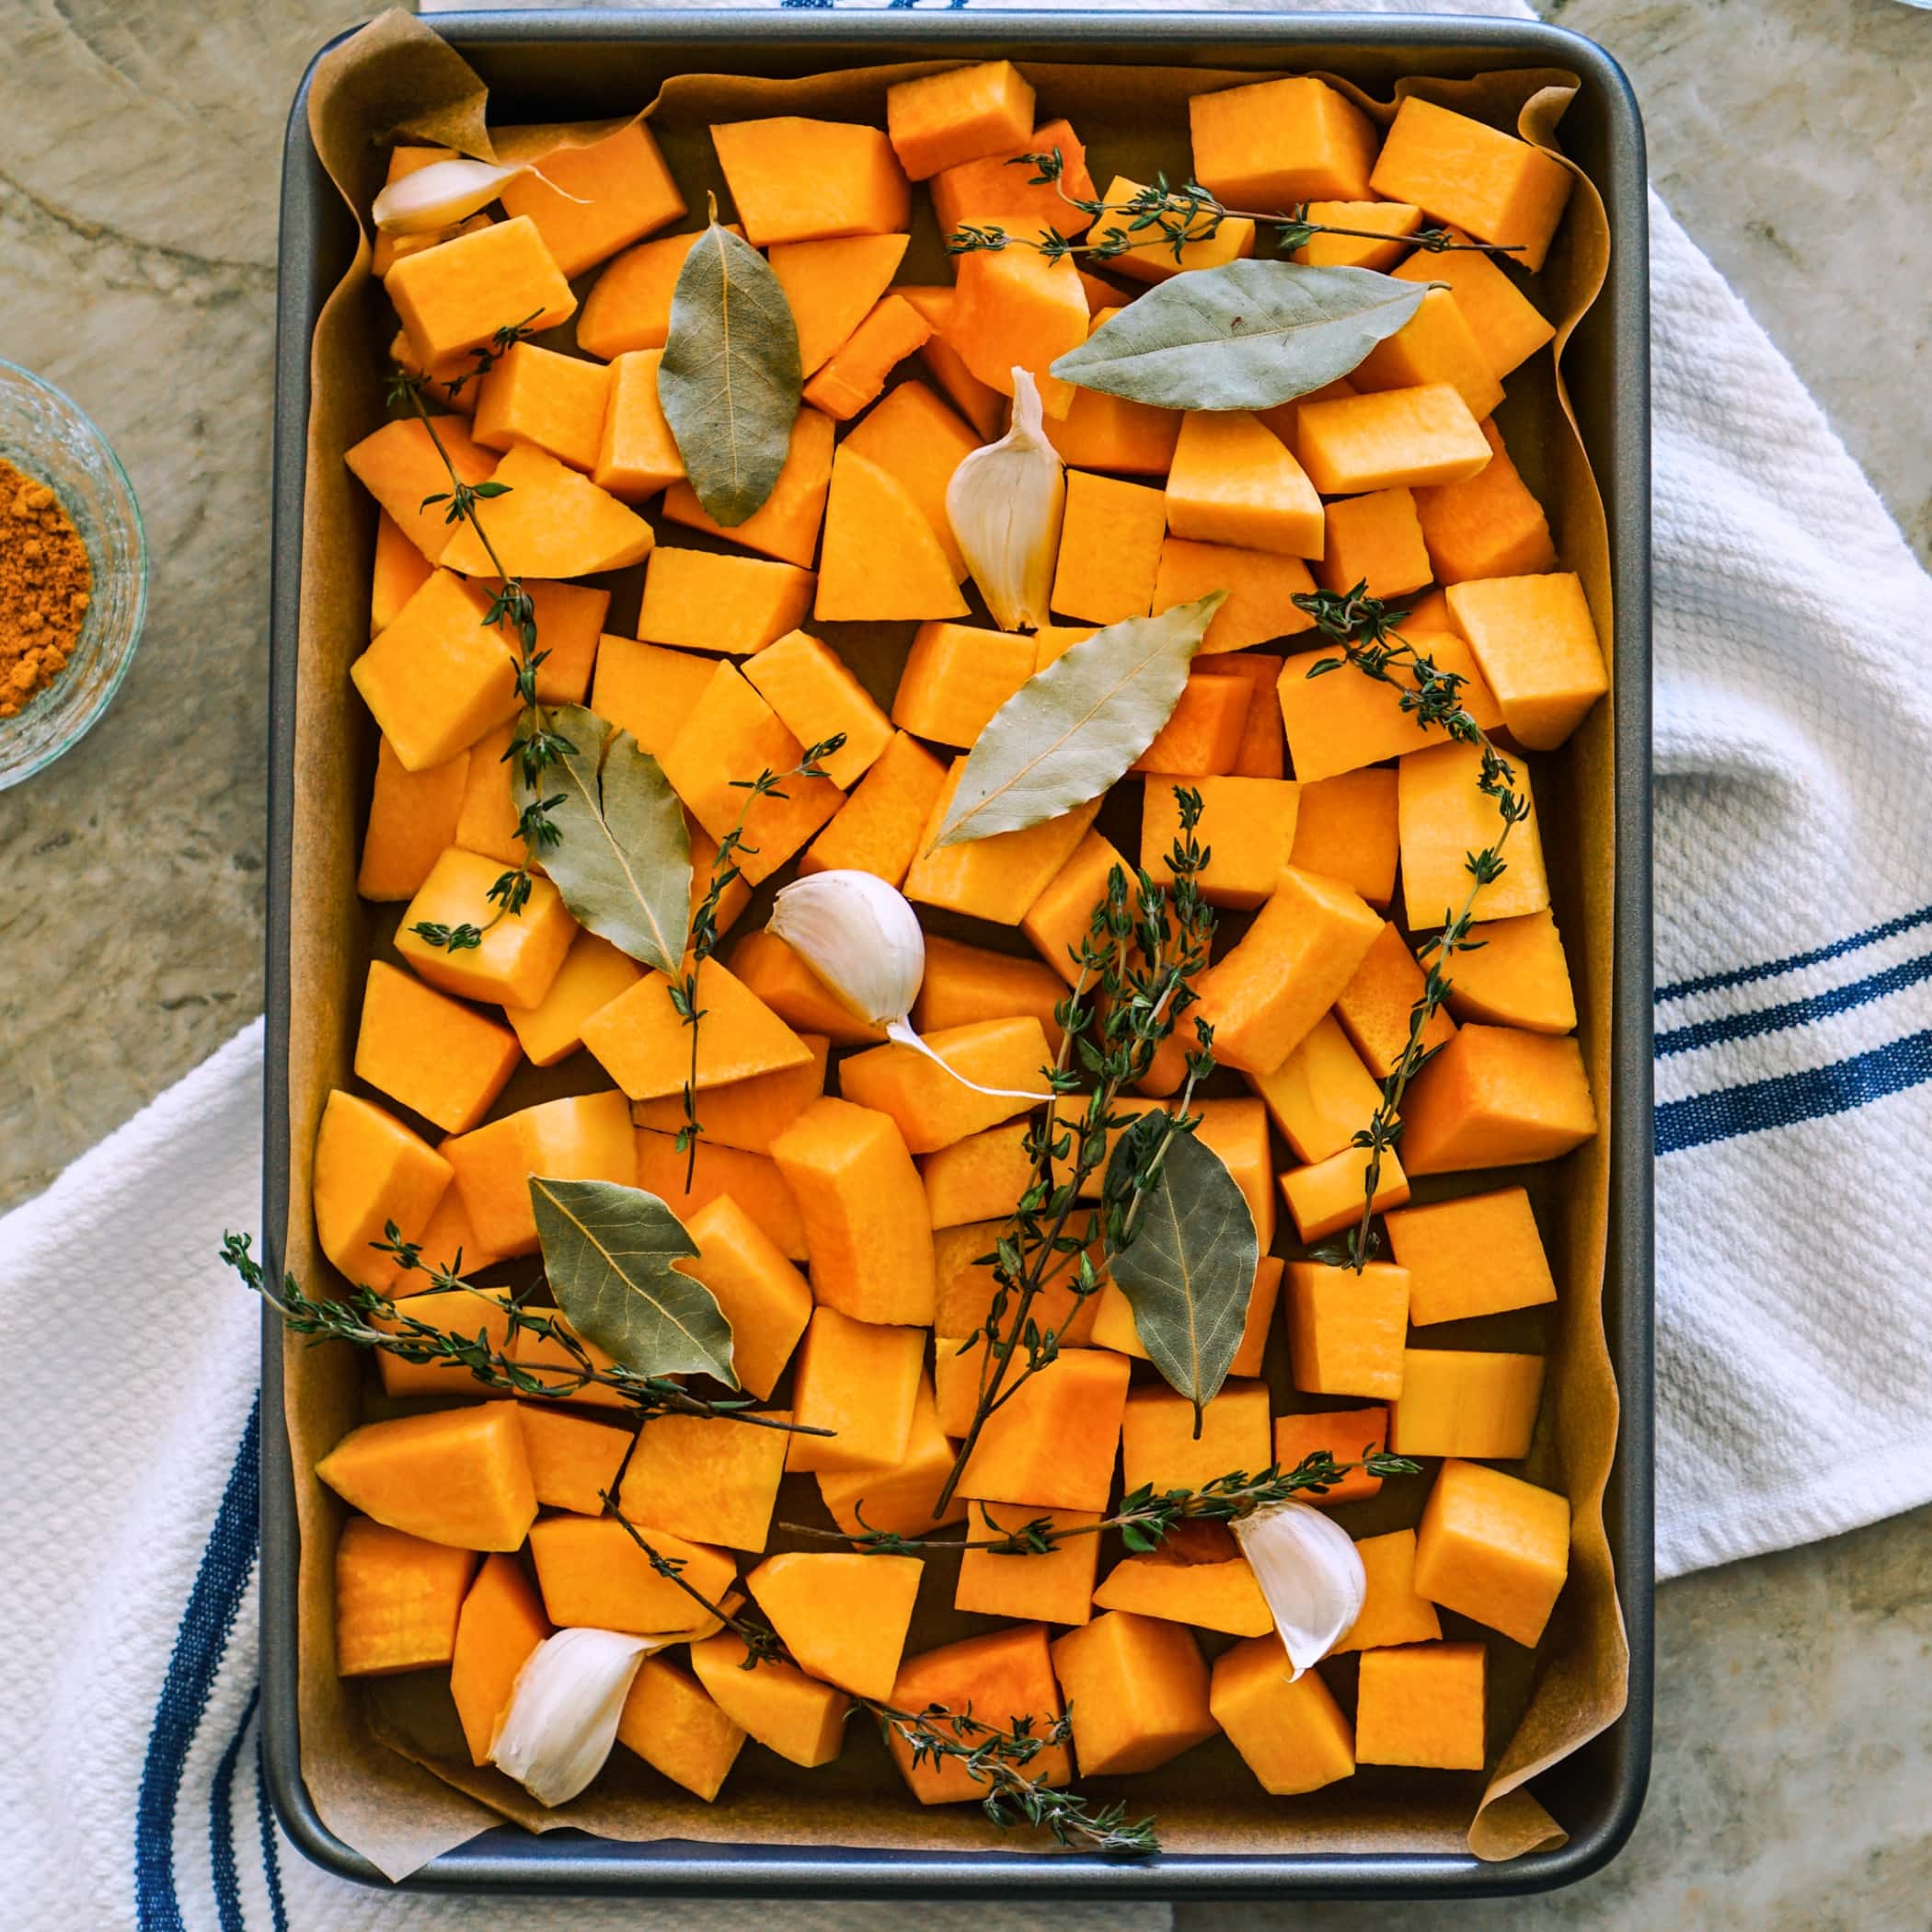 Diced Butternut Squash Laid on a Baking Pan for Roasting